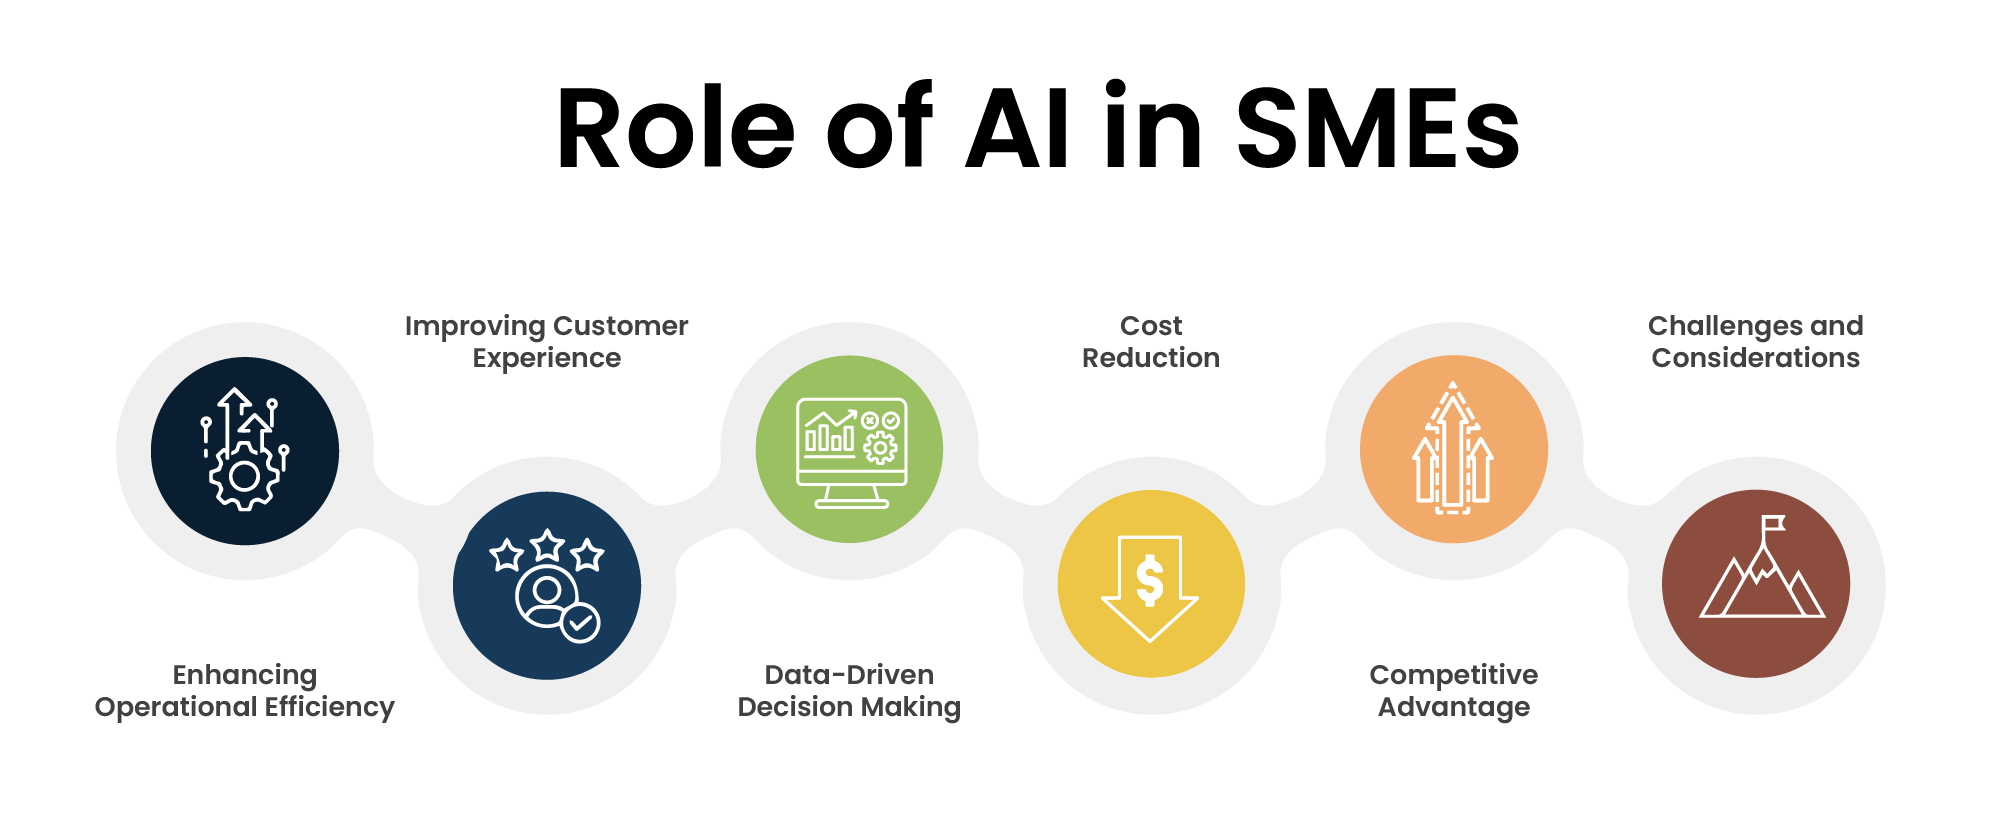 Role of AI in SMEs